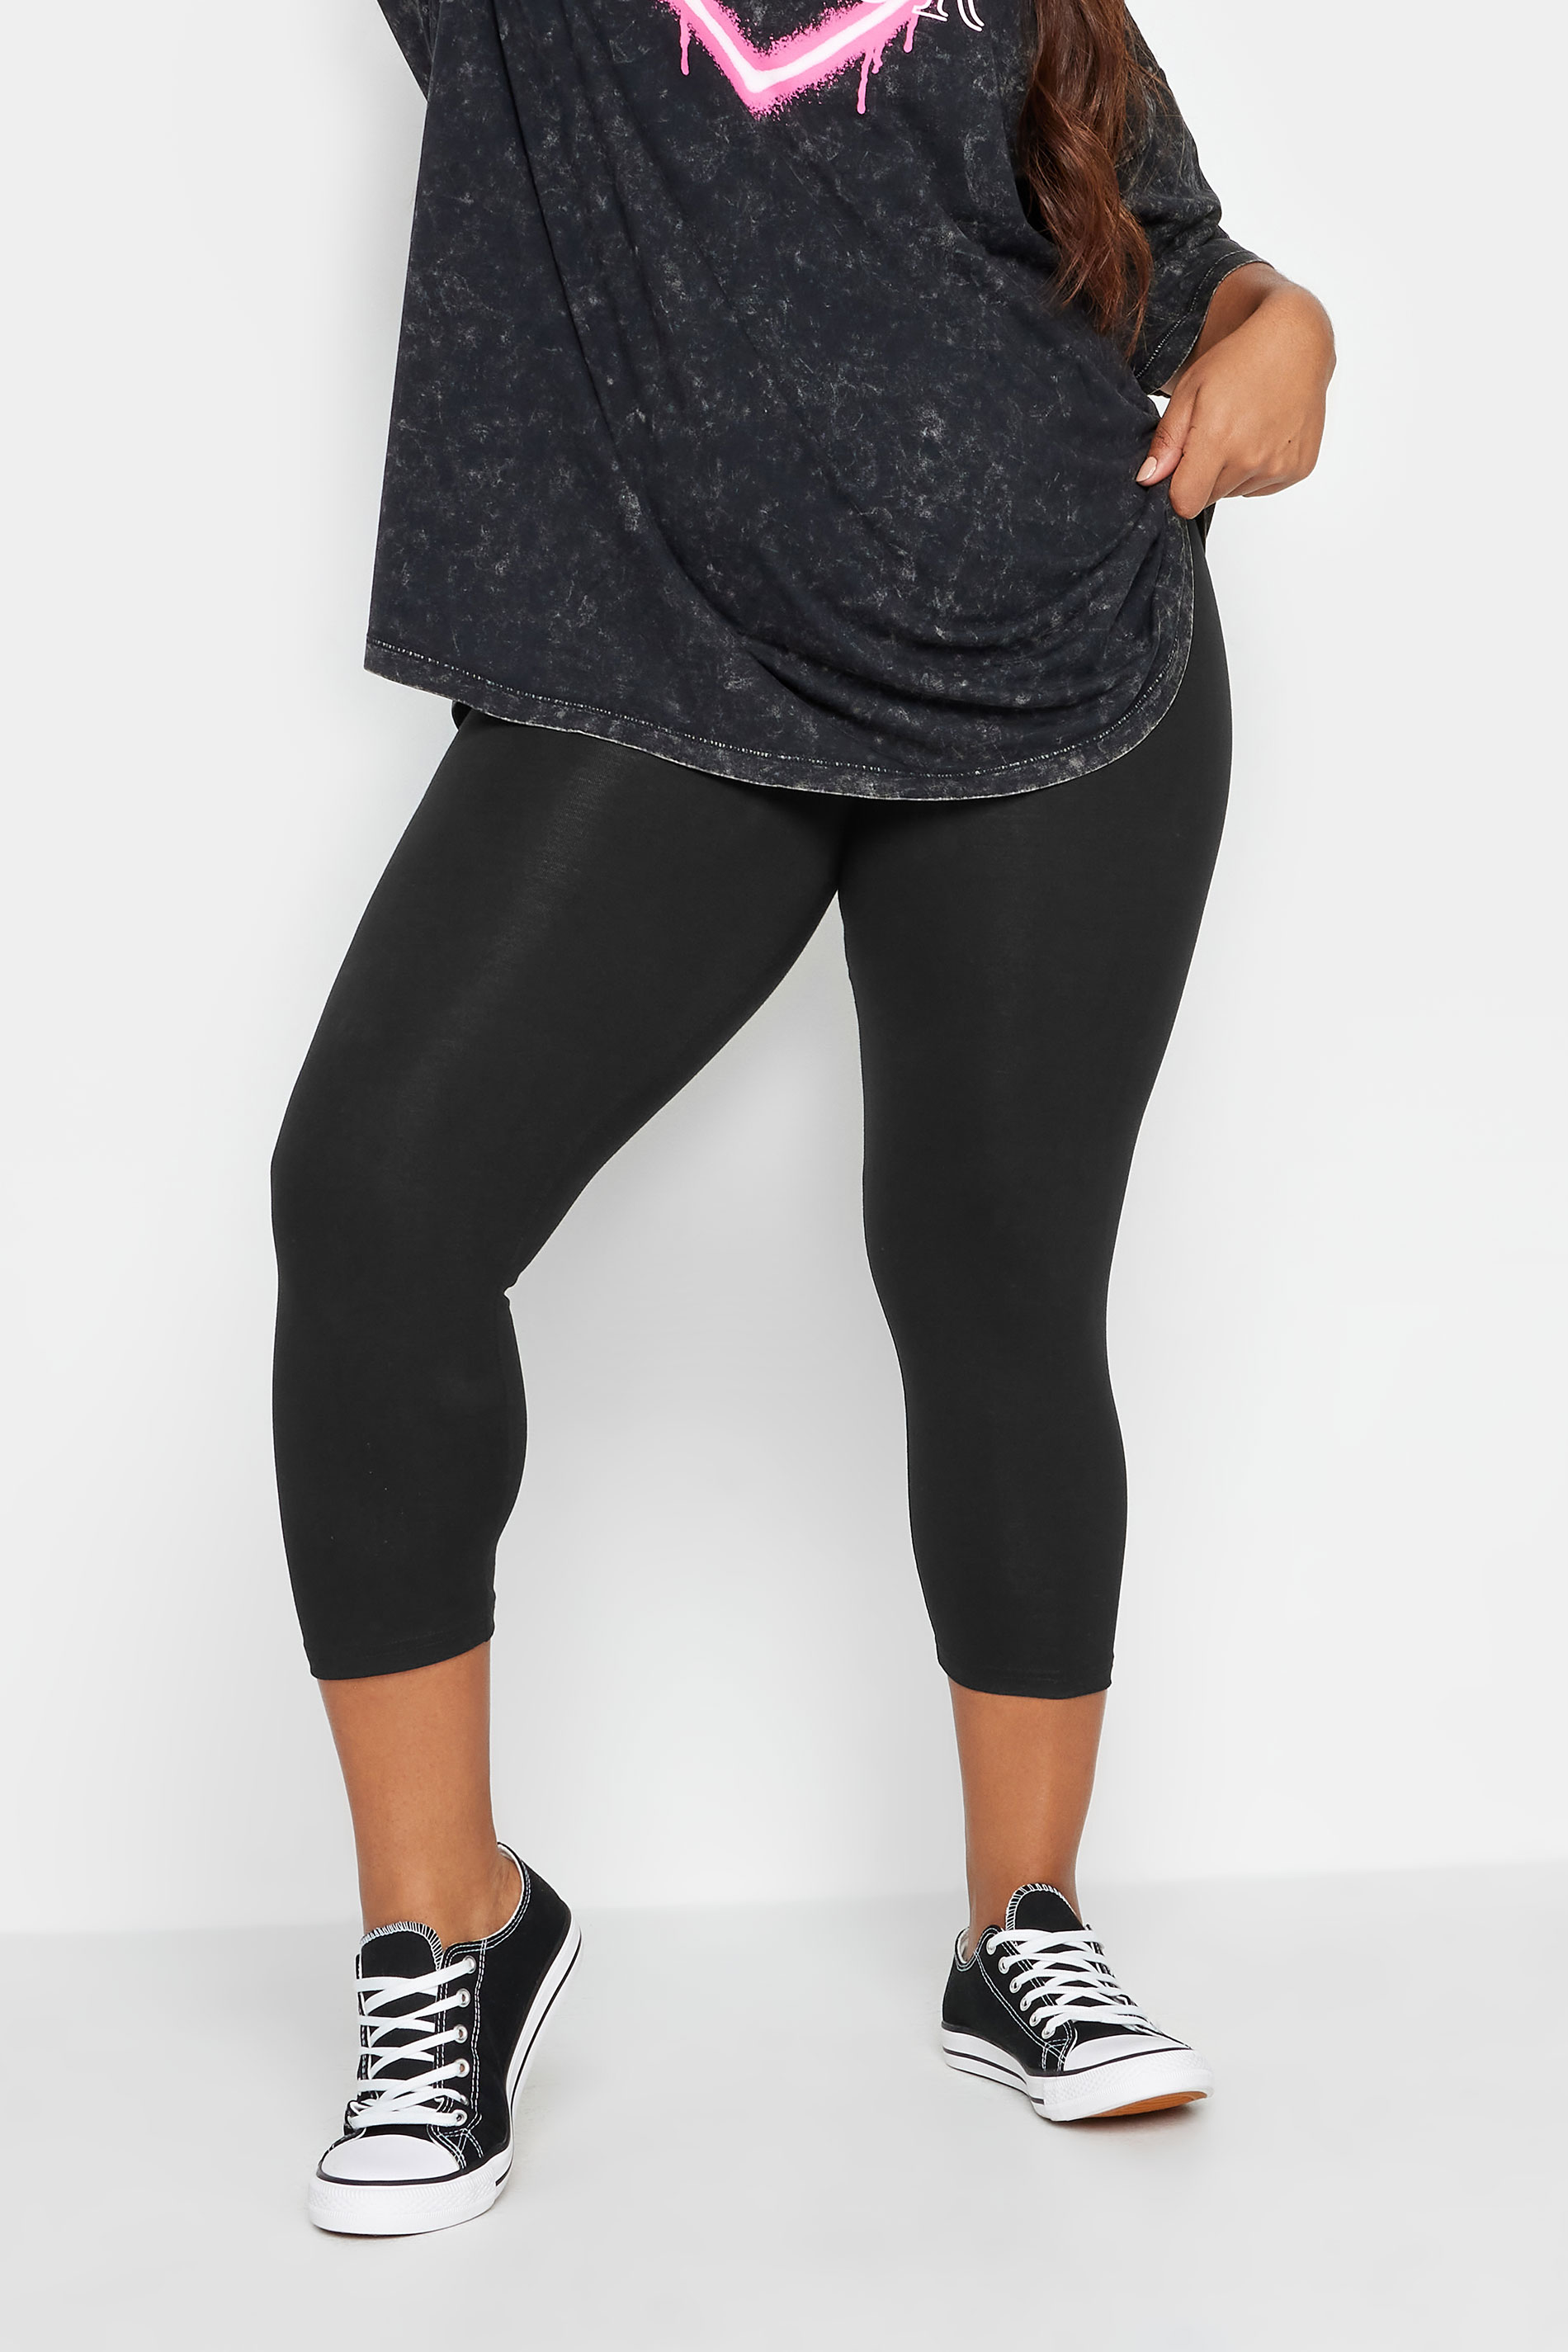 YOURS Curve Plus Size Black Cropped Leggings | Yours Clothing  2